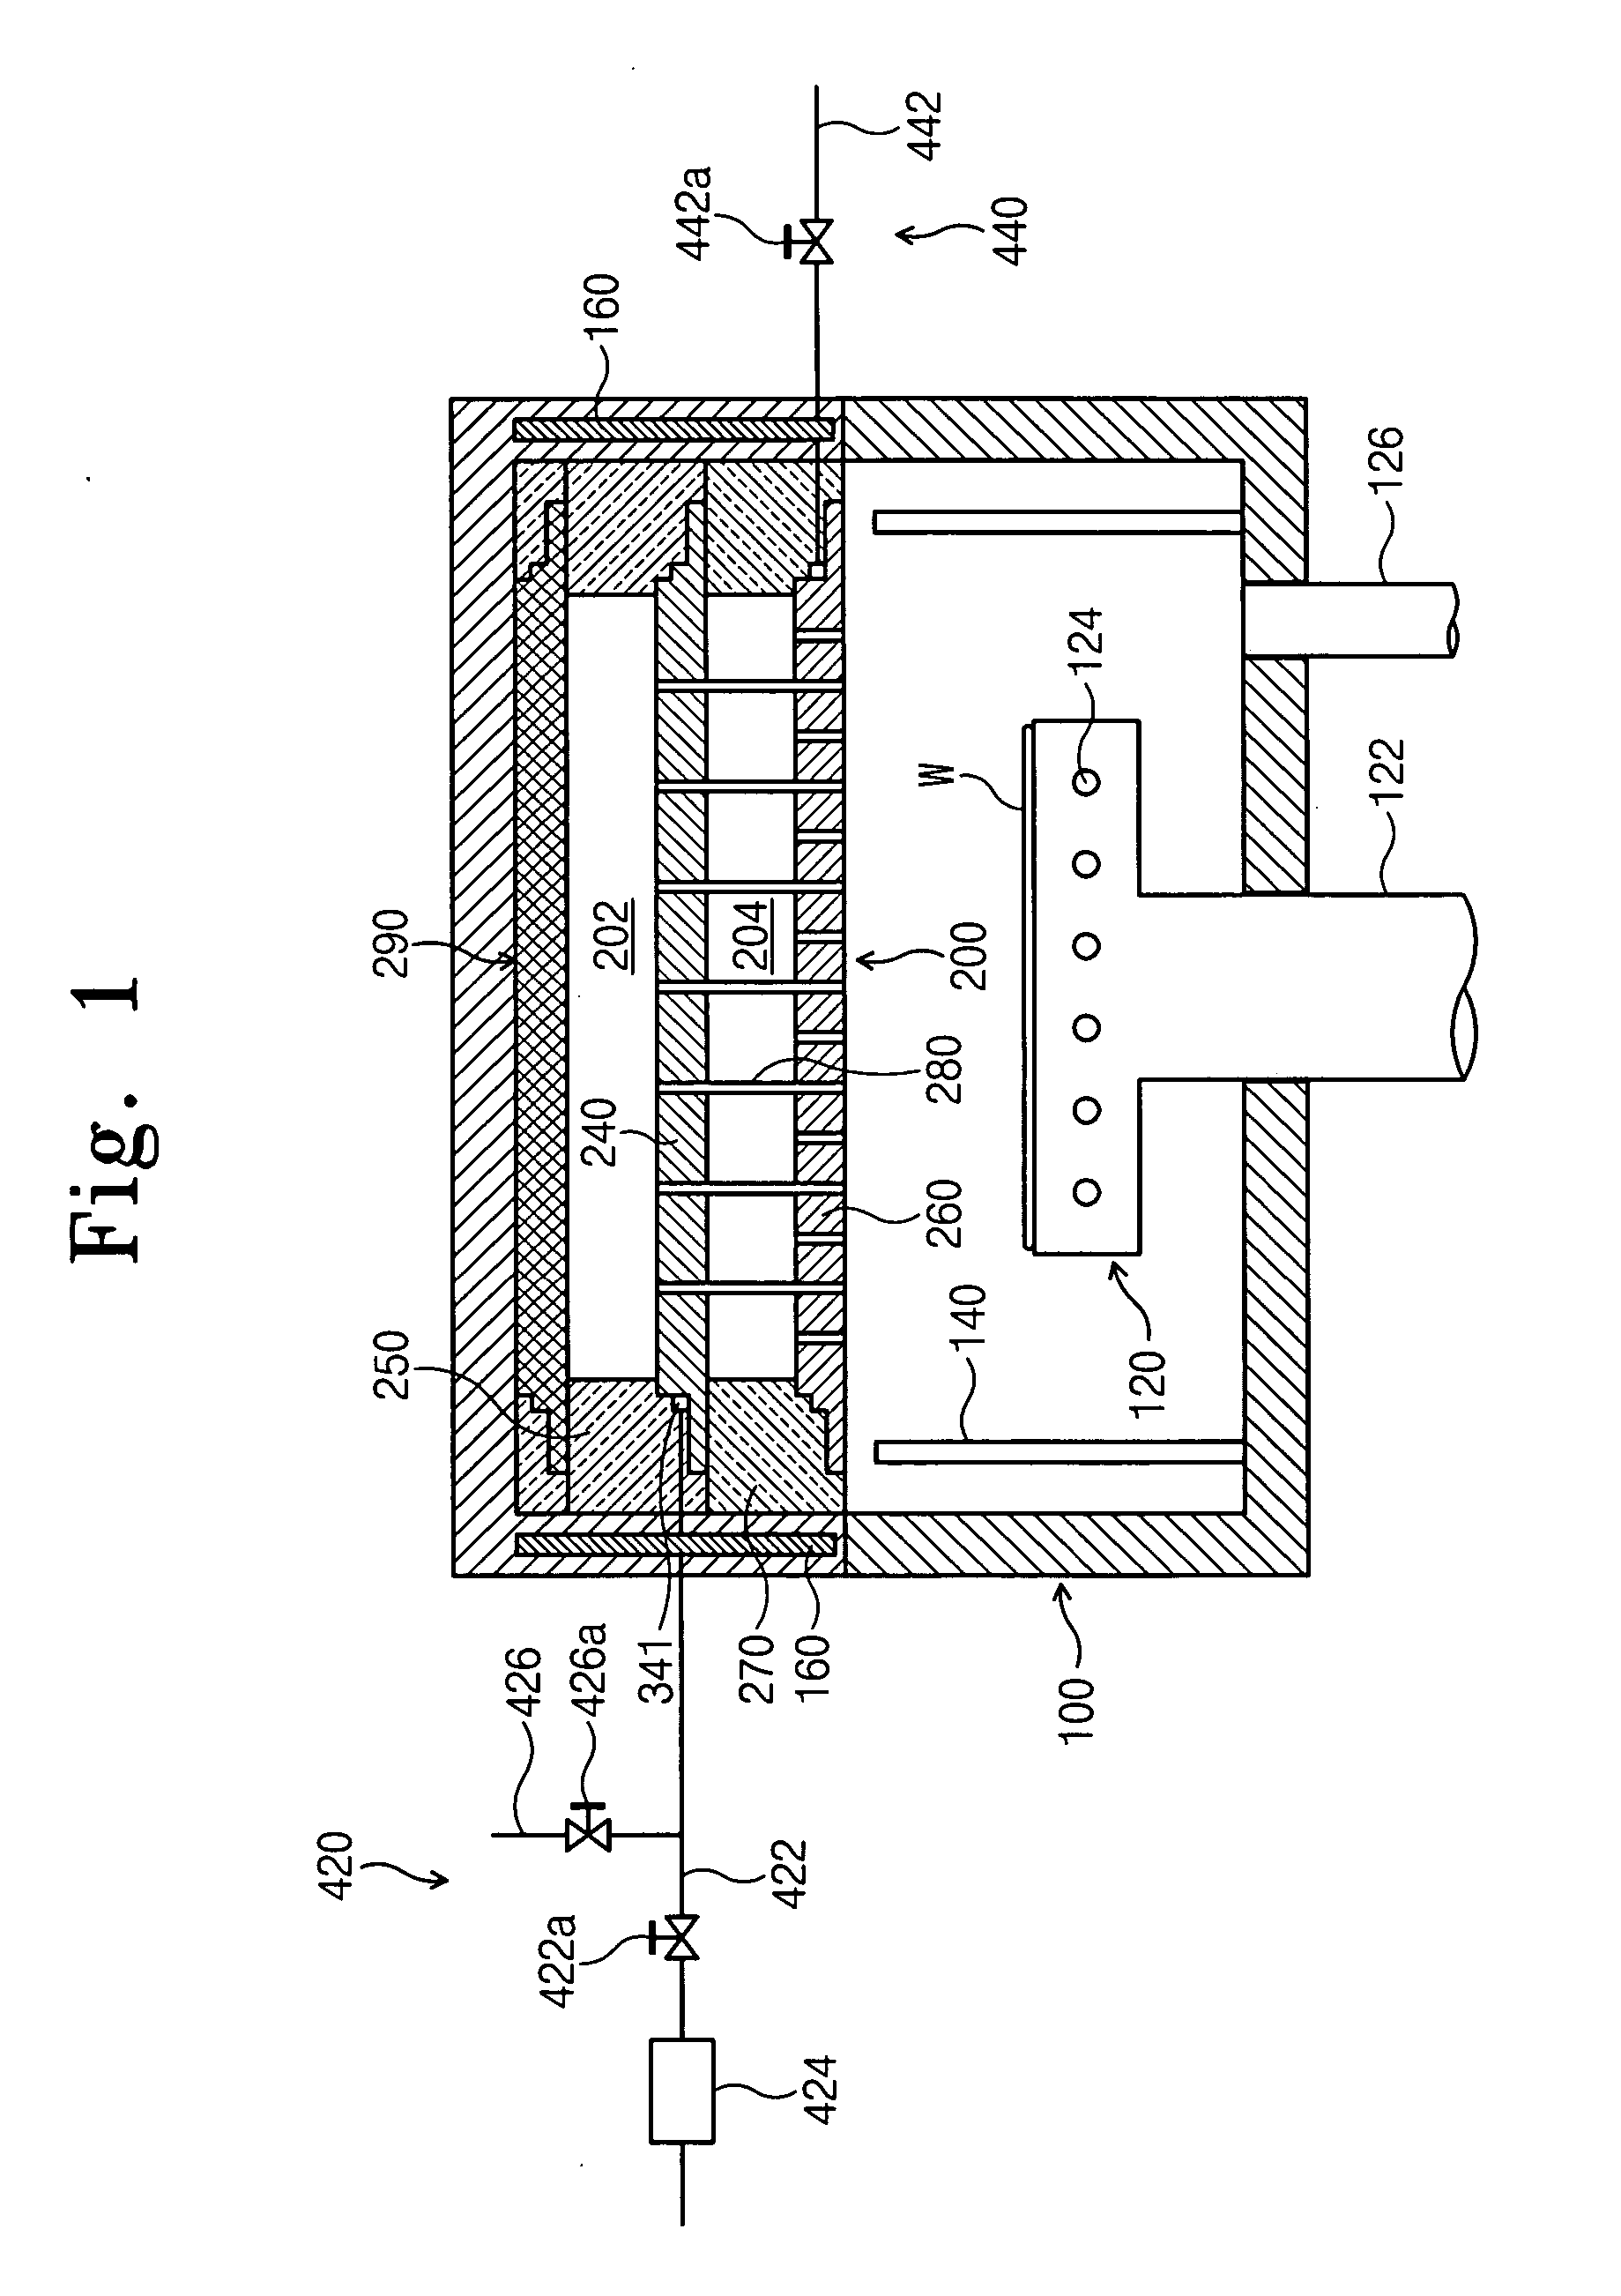 Showerhead with branched gas receiving channel and apparatus including the same for use in manufacturing semiconductor substrates